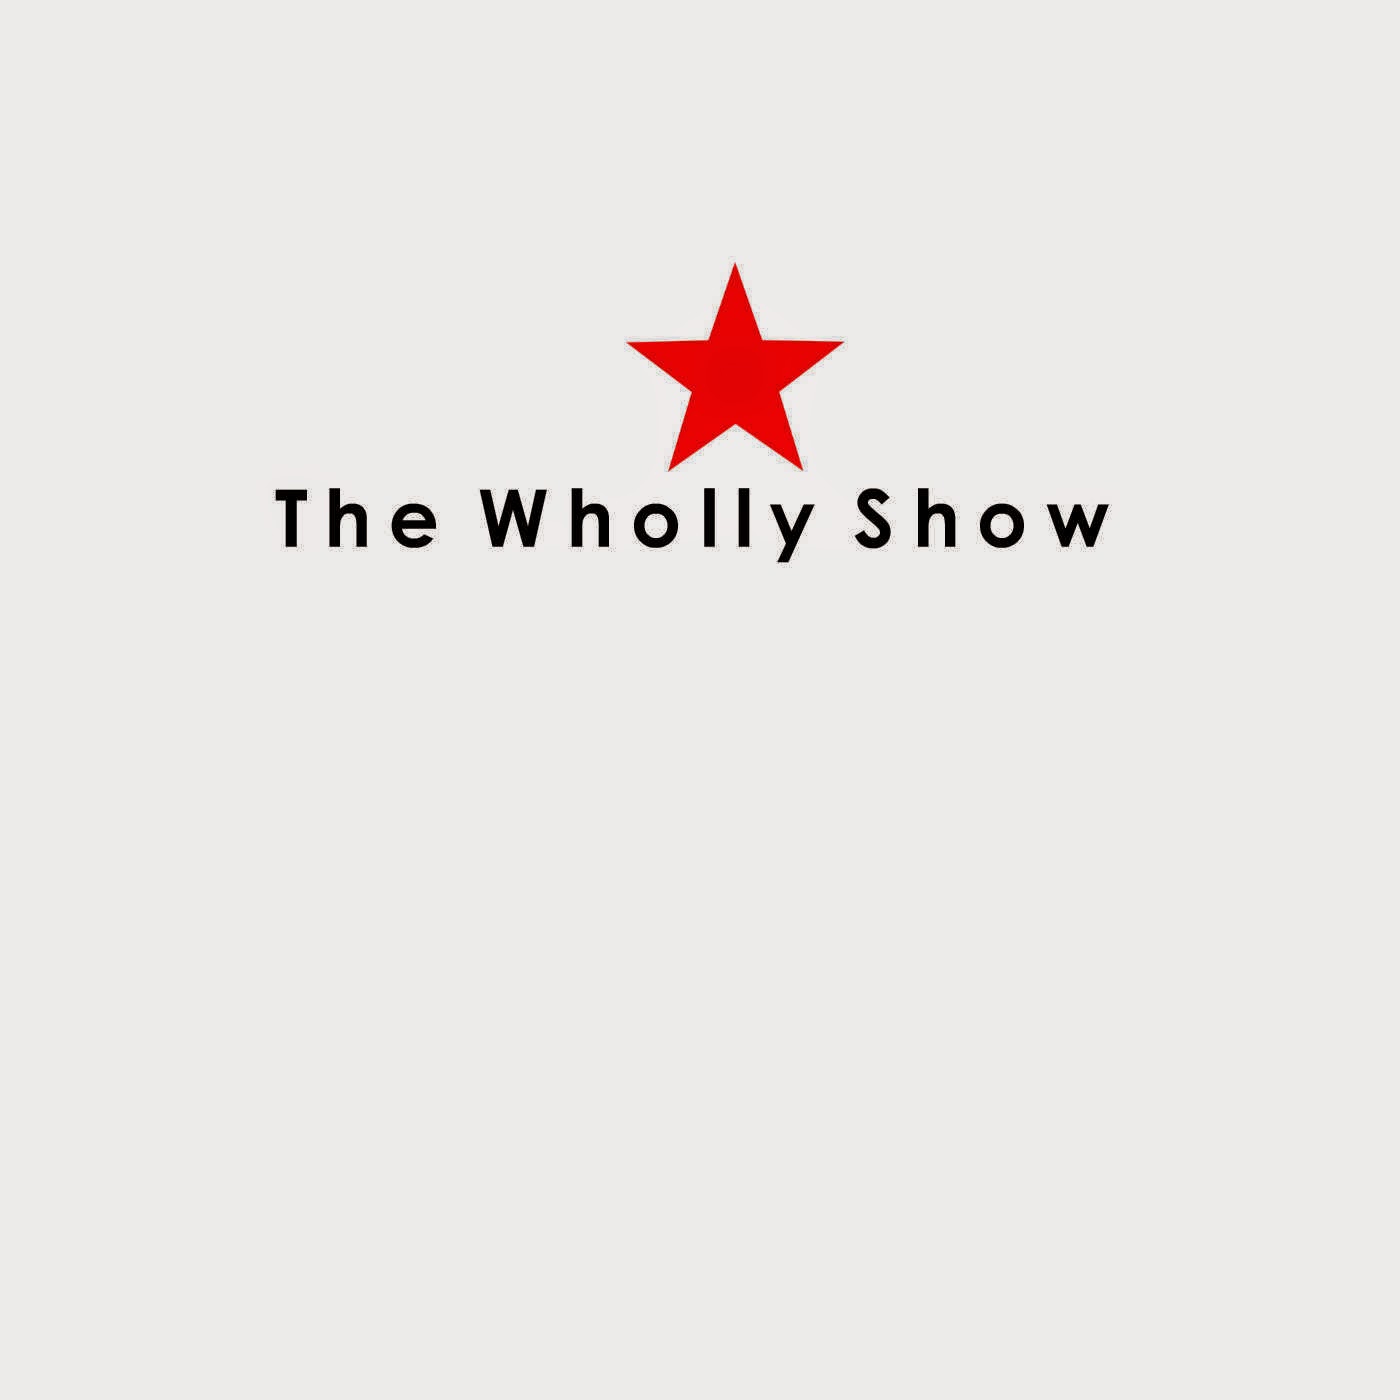 The Wholly Show 14 July 2014